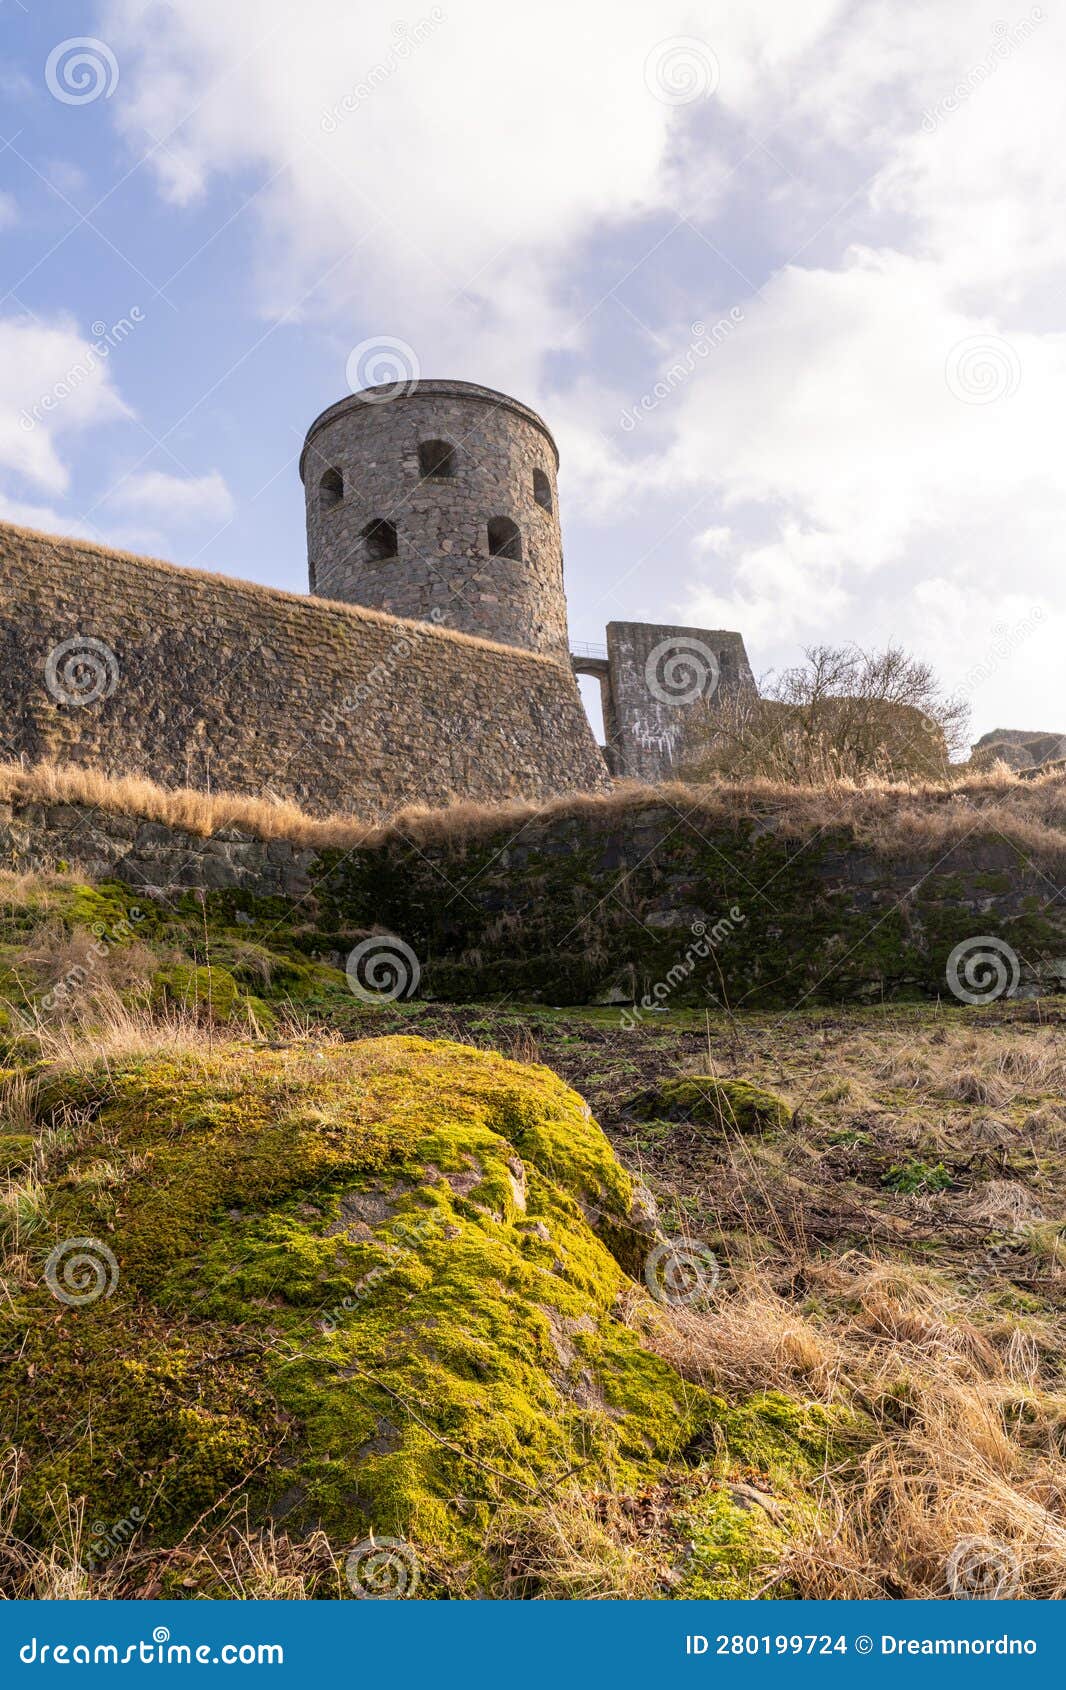 bohus fortress, founded on a cliff by the river gota in sweden